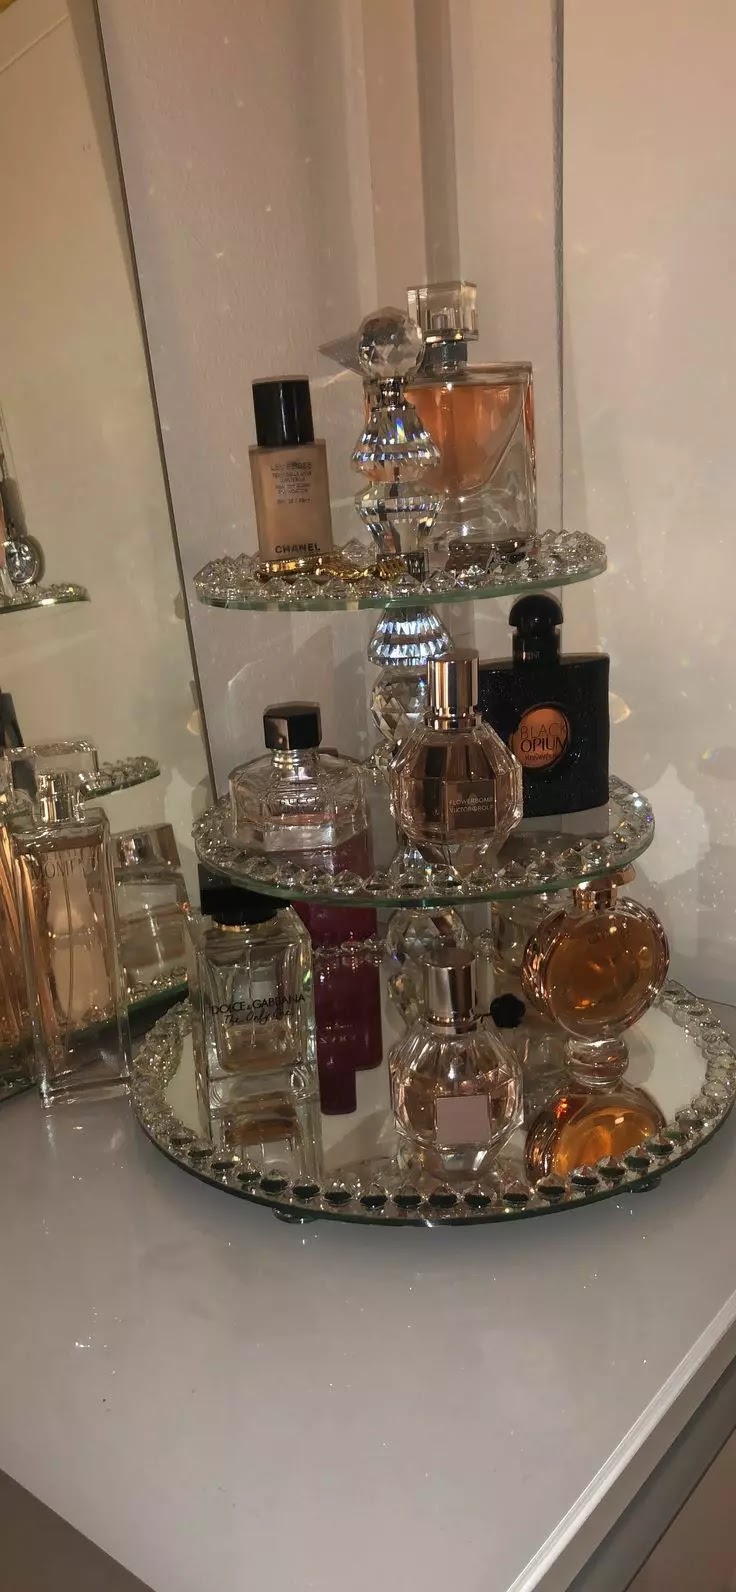 Perfumes and fragrances